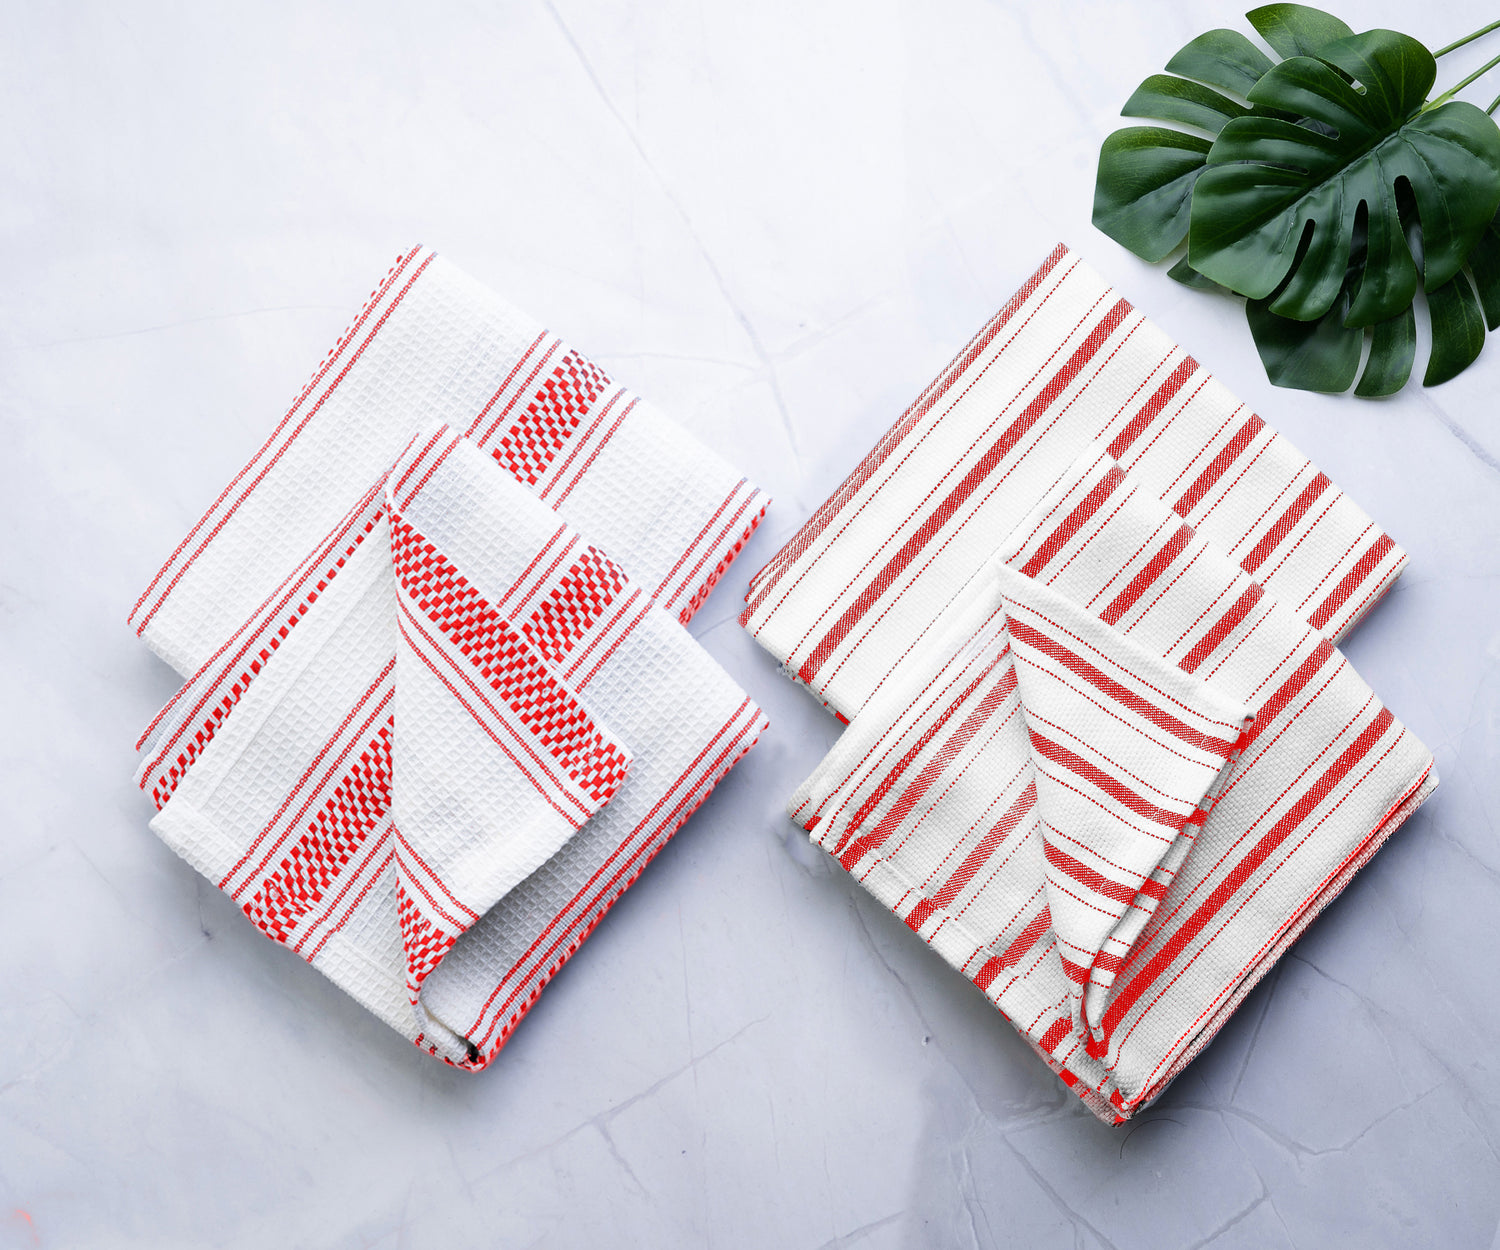 How to Freshen Up Your Home with Amazing Dish Towels?